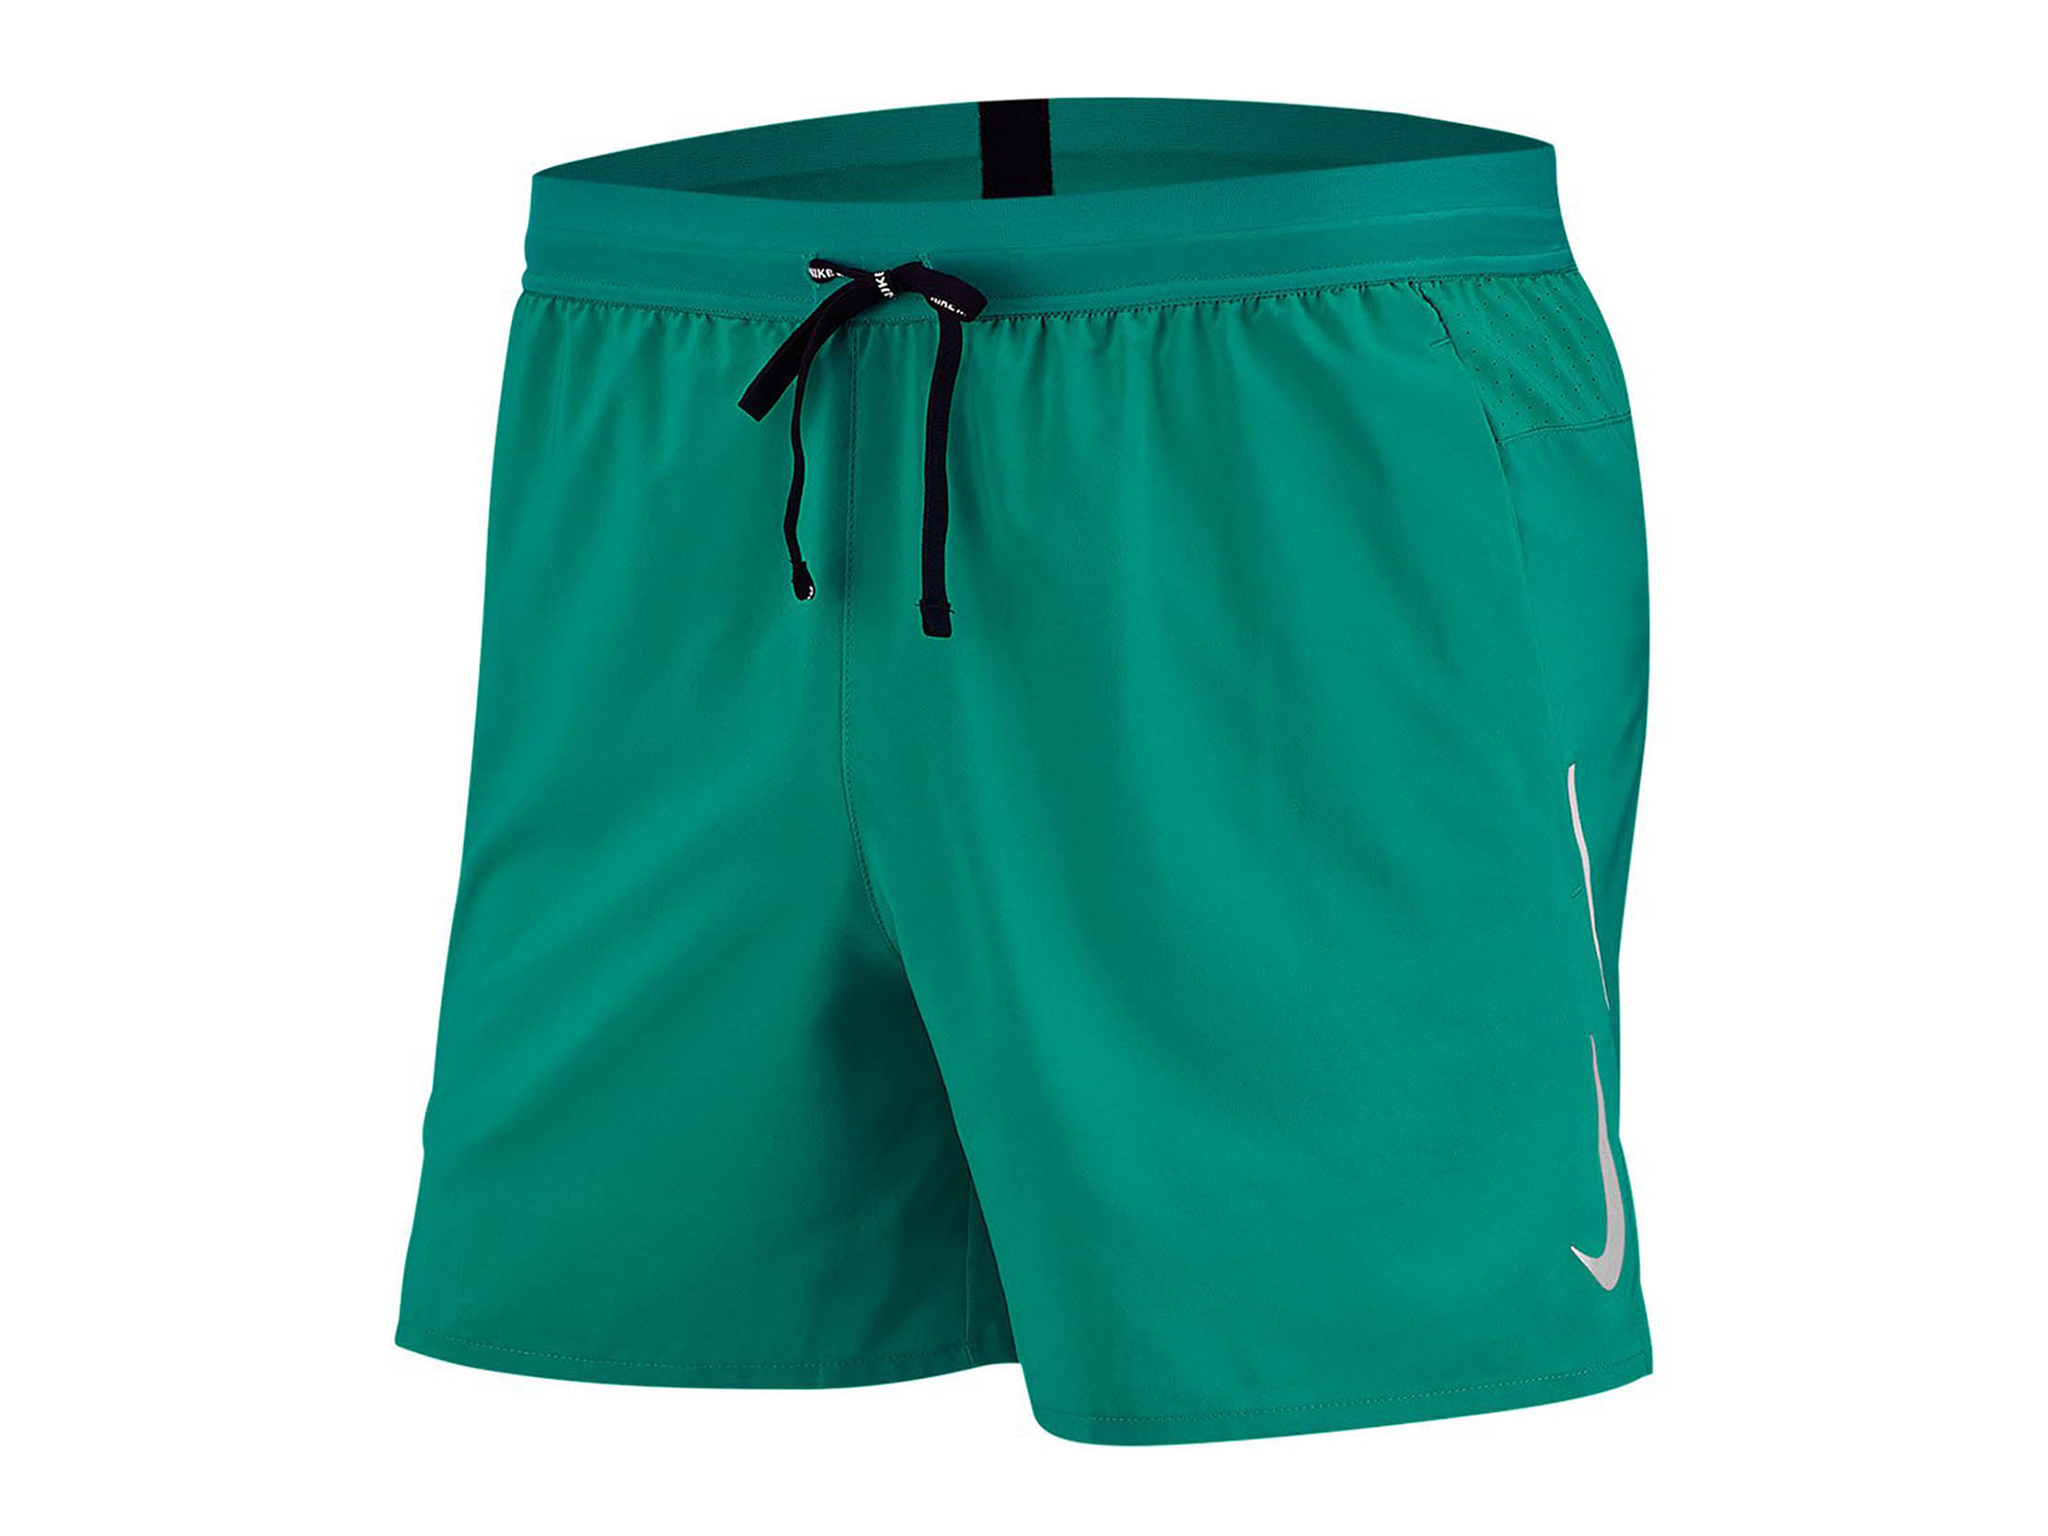 Best men's running shorts 2021: From track to trail